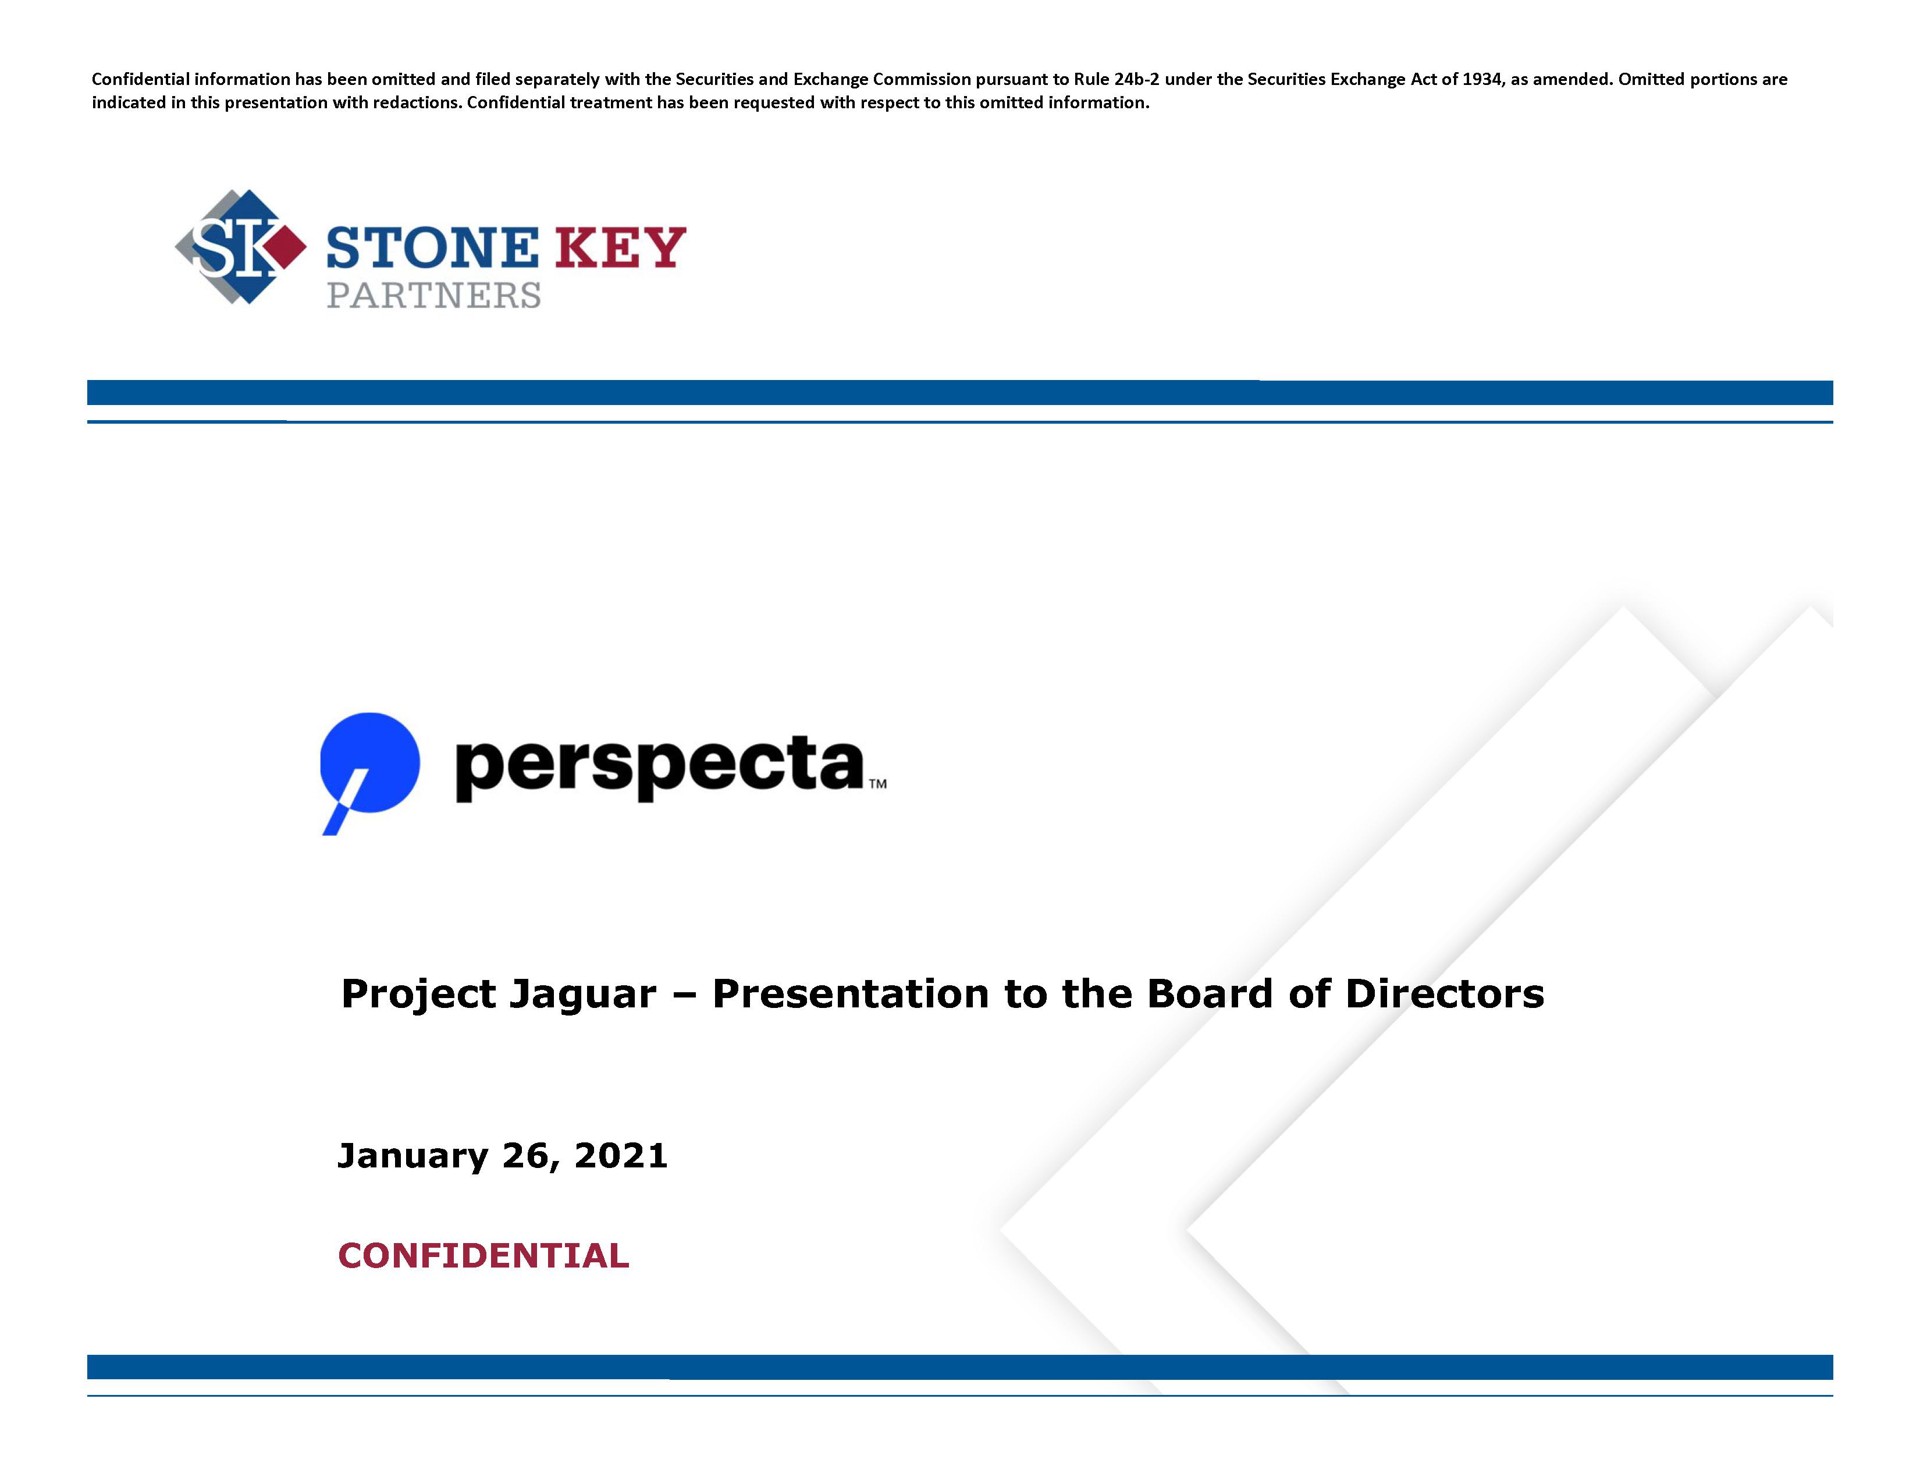 stone key partners project jaguar presentation to the board of directors confidential | Stone Key Partners